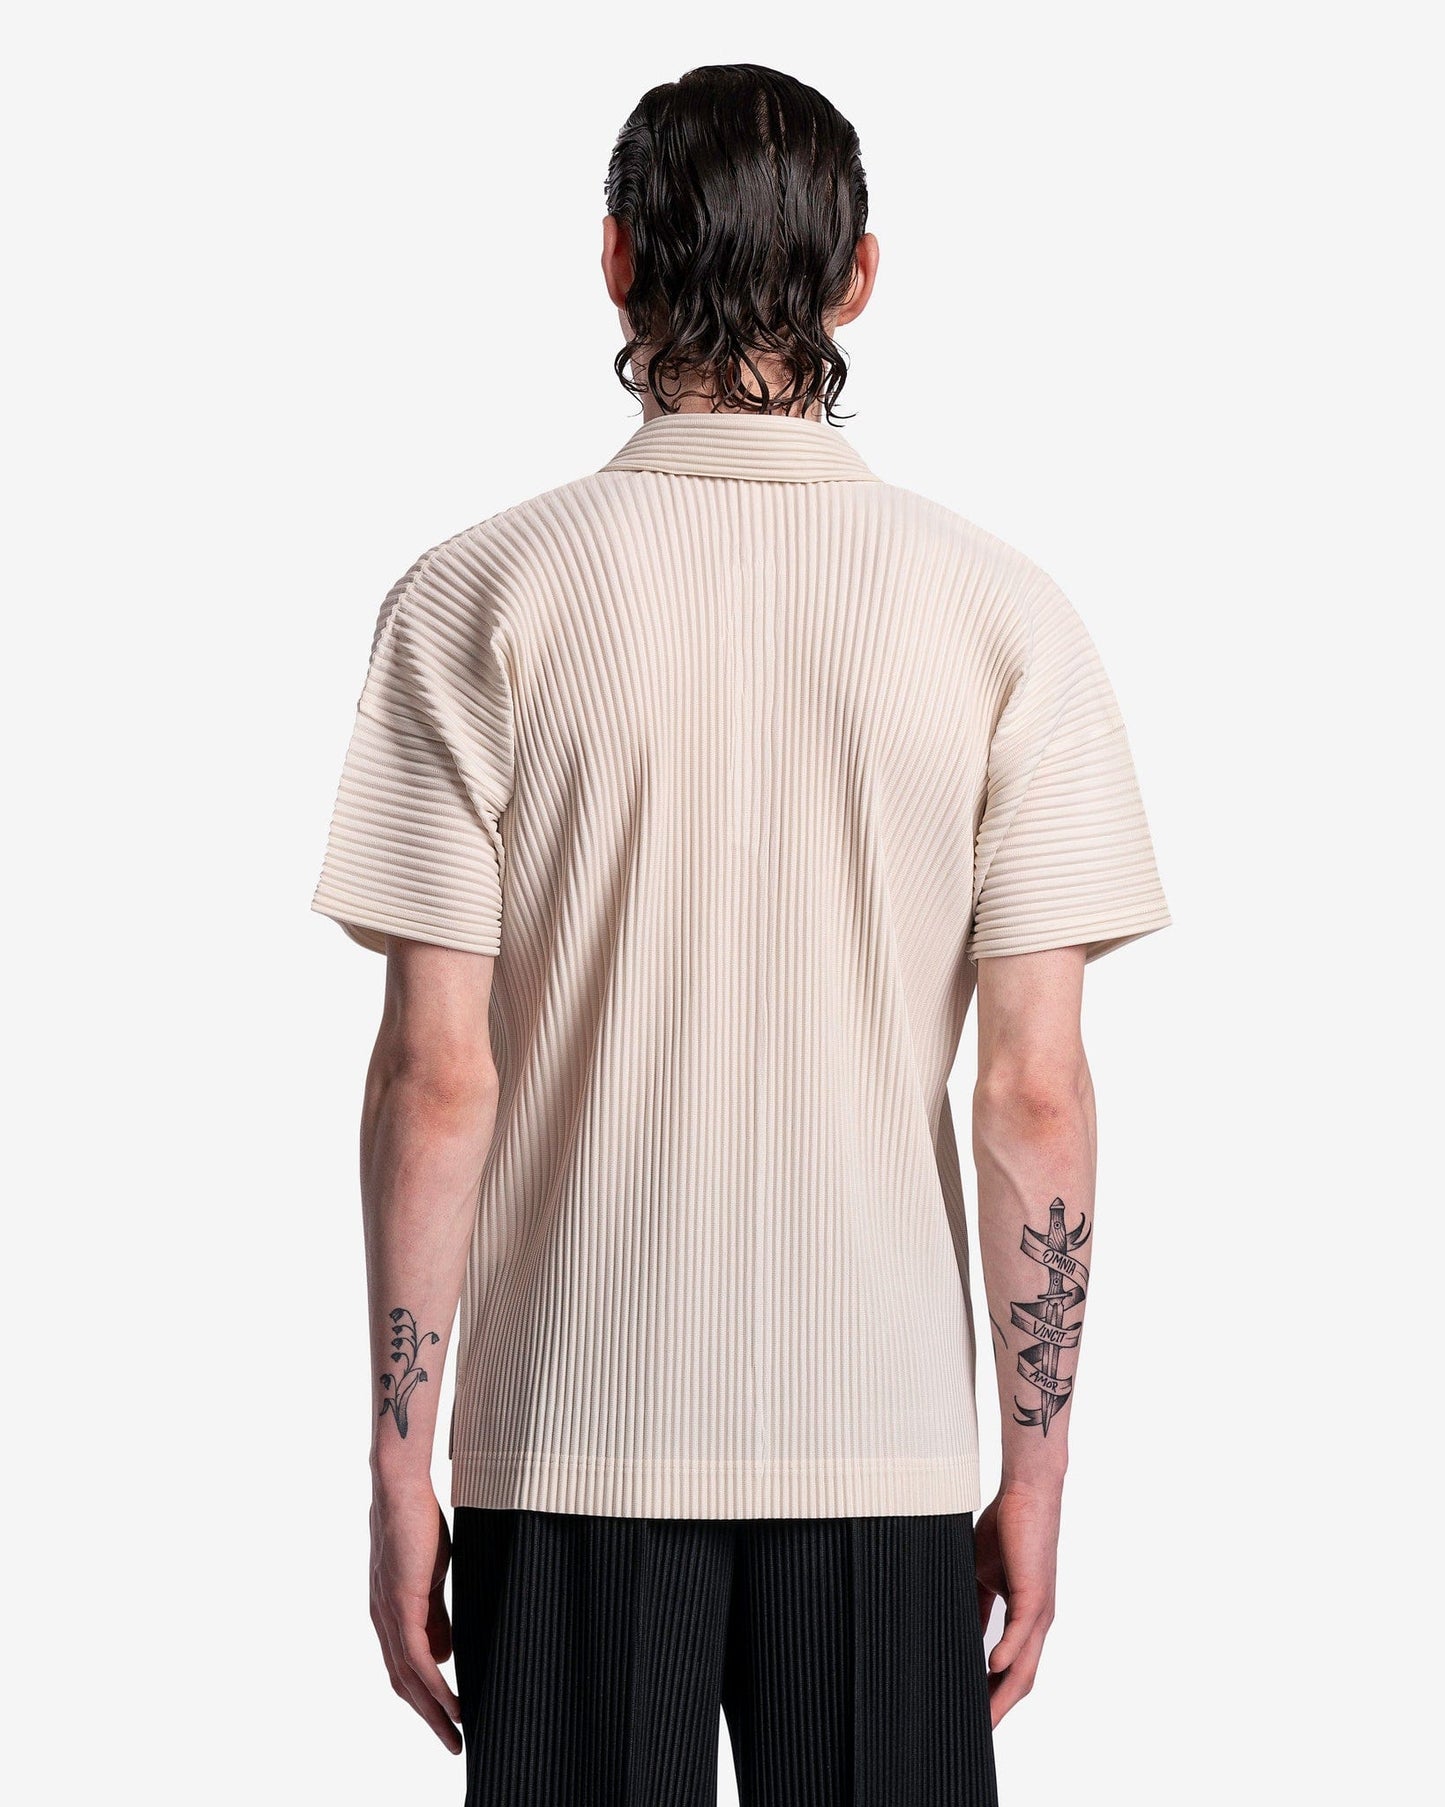 Homme Plissé Issey Miyake Men's Shirts MC June Polo in Ivory